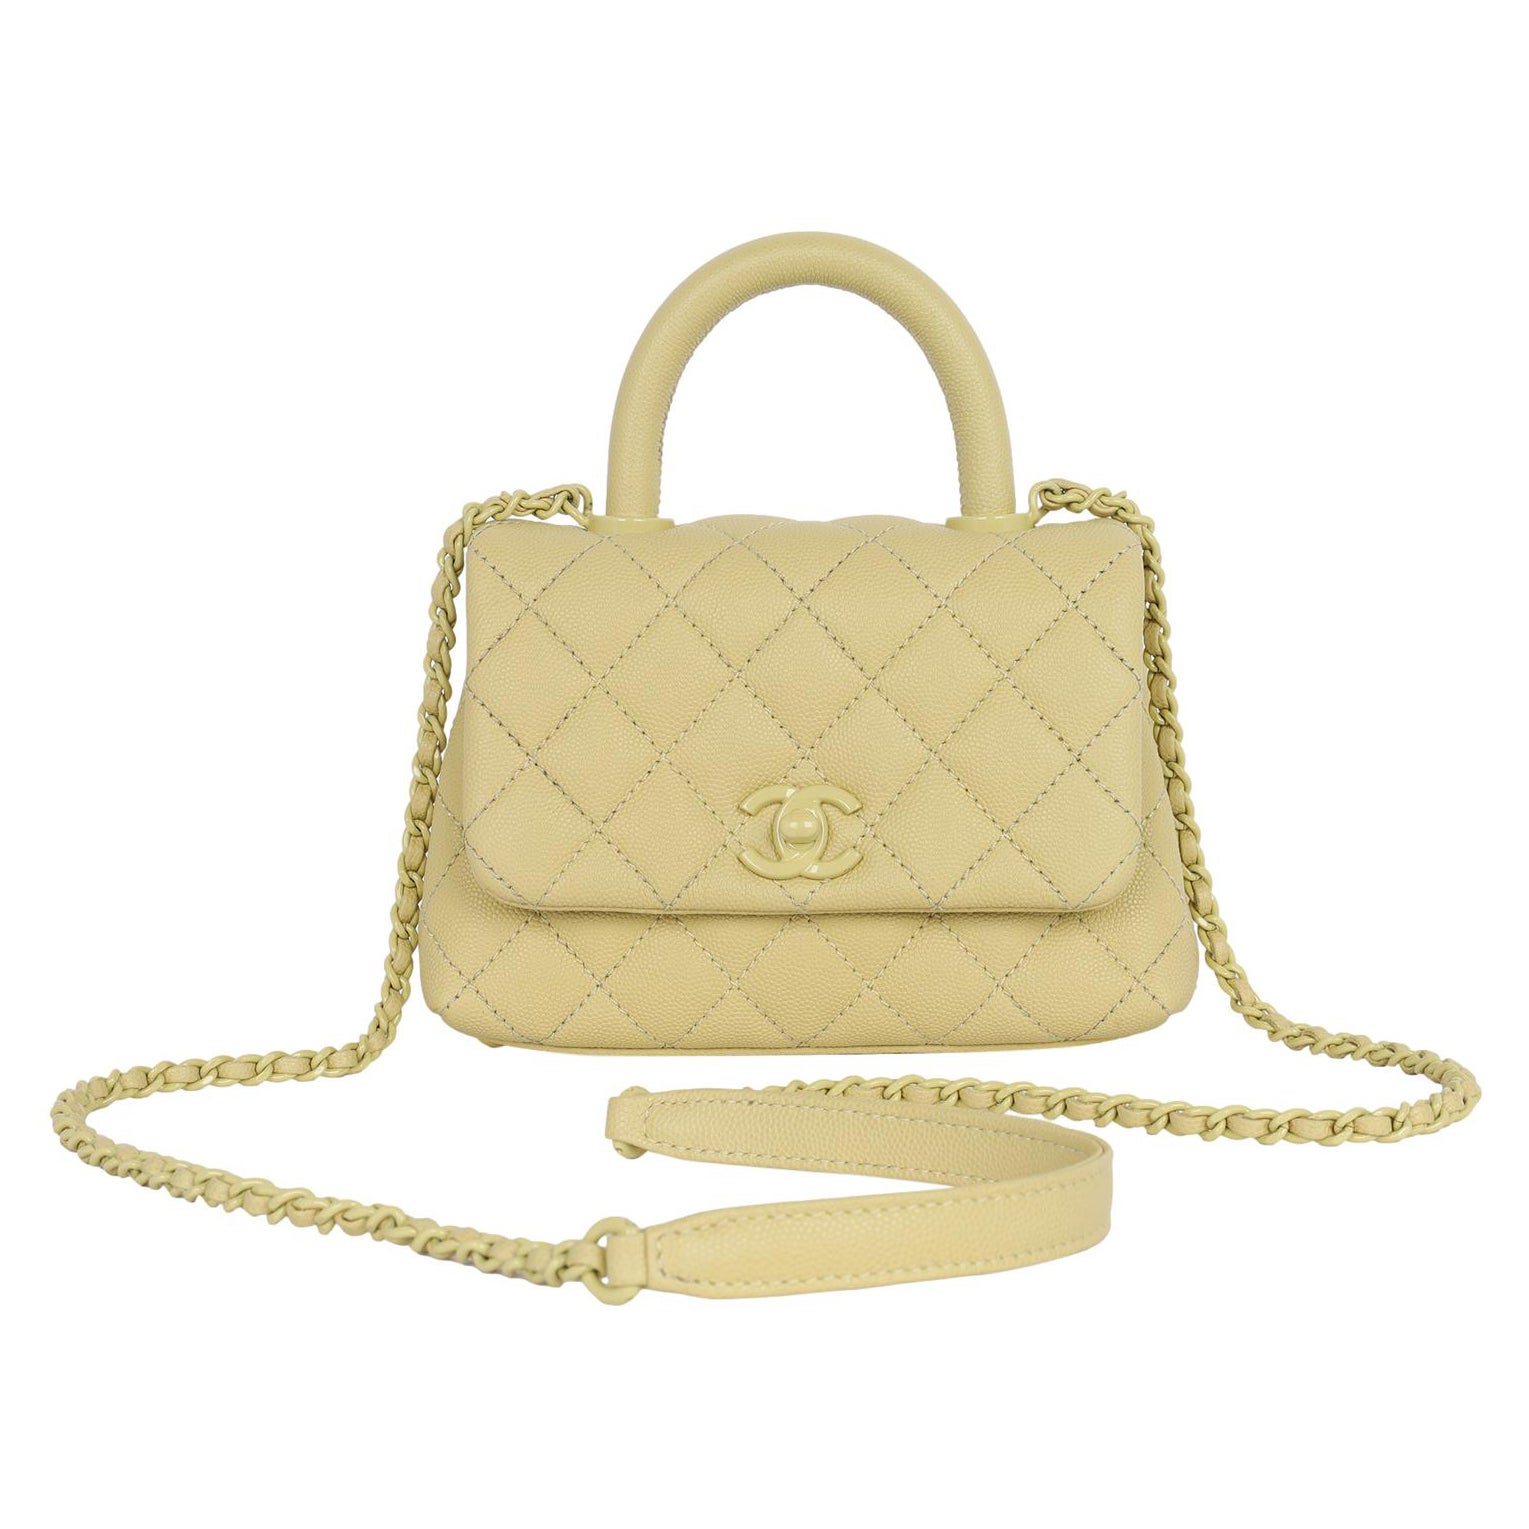 Is Chanel single flap a good investment?